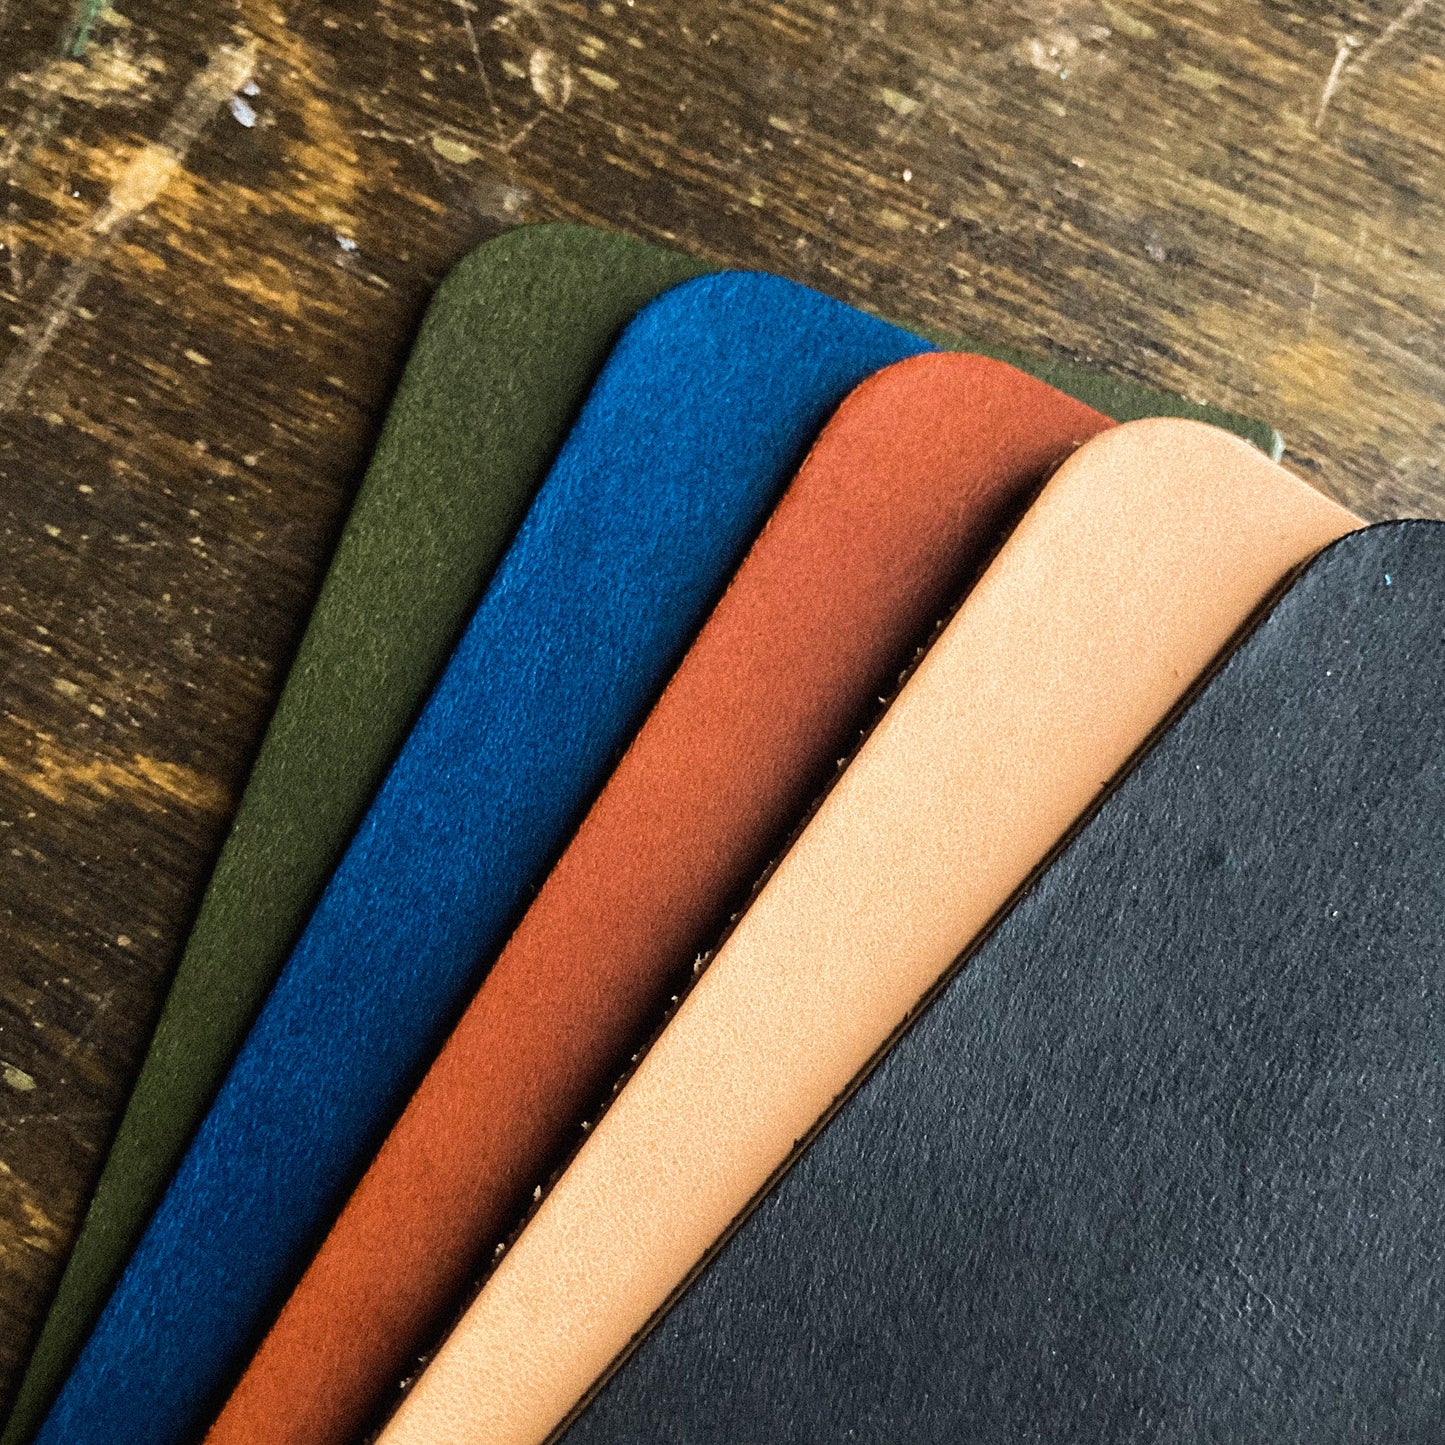 All Harland Handmade Wallet Colors